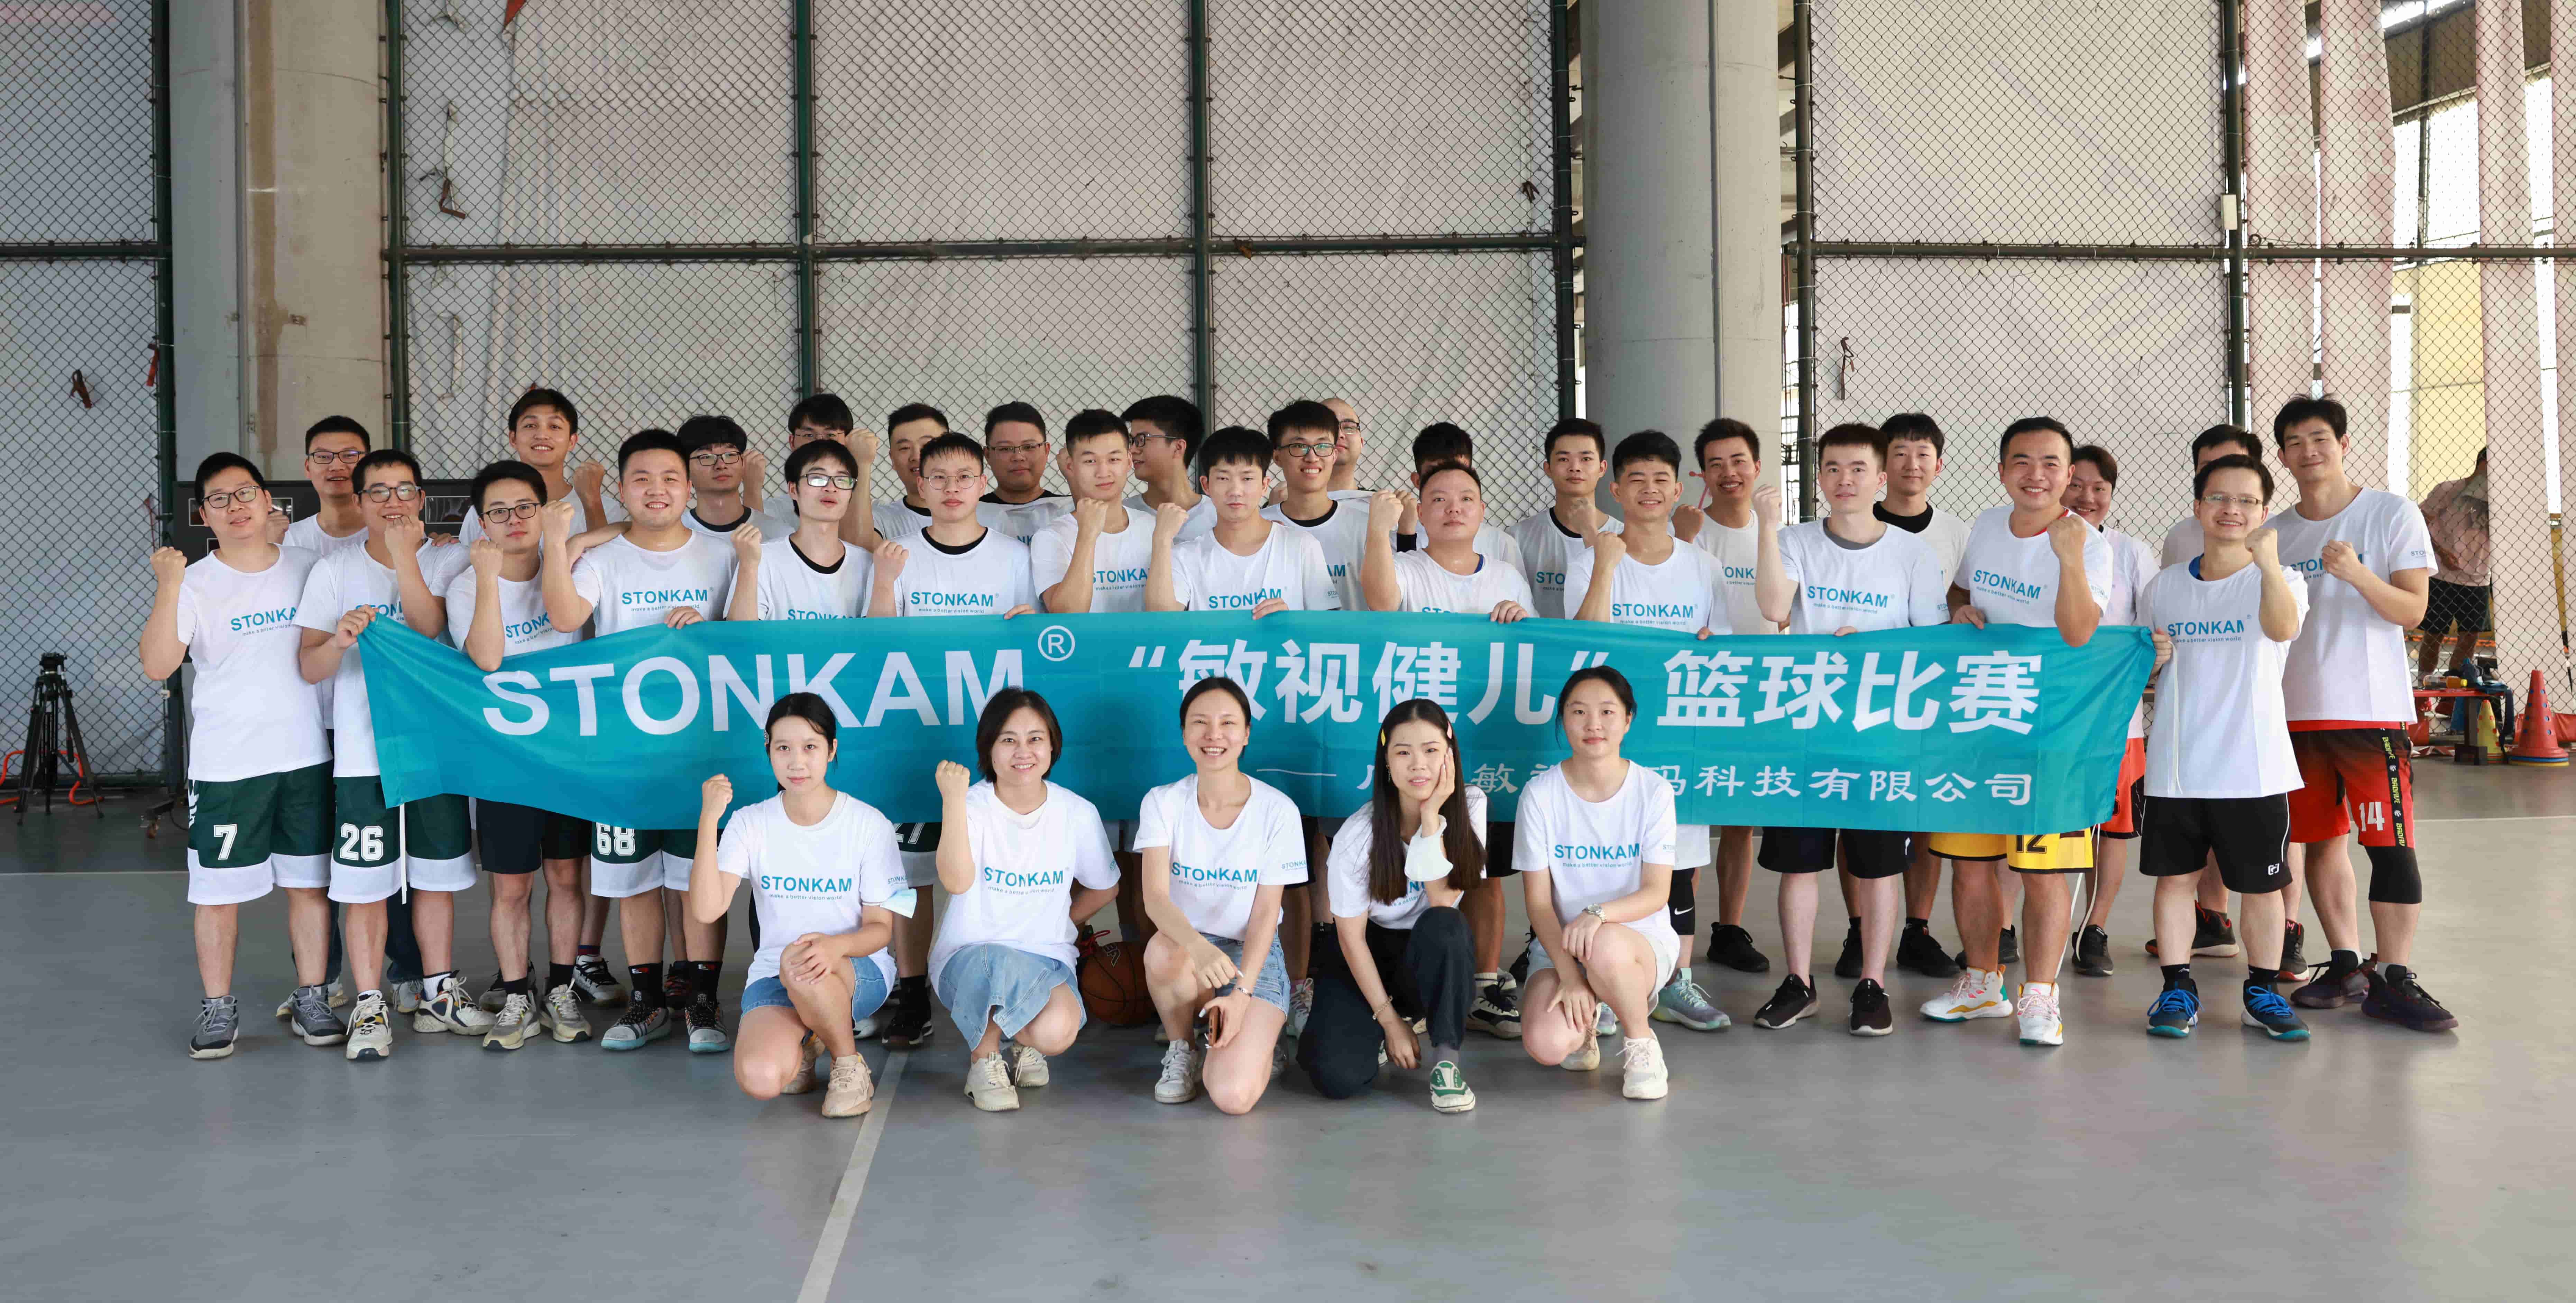 STONKAM basketball competition was officially held!